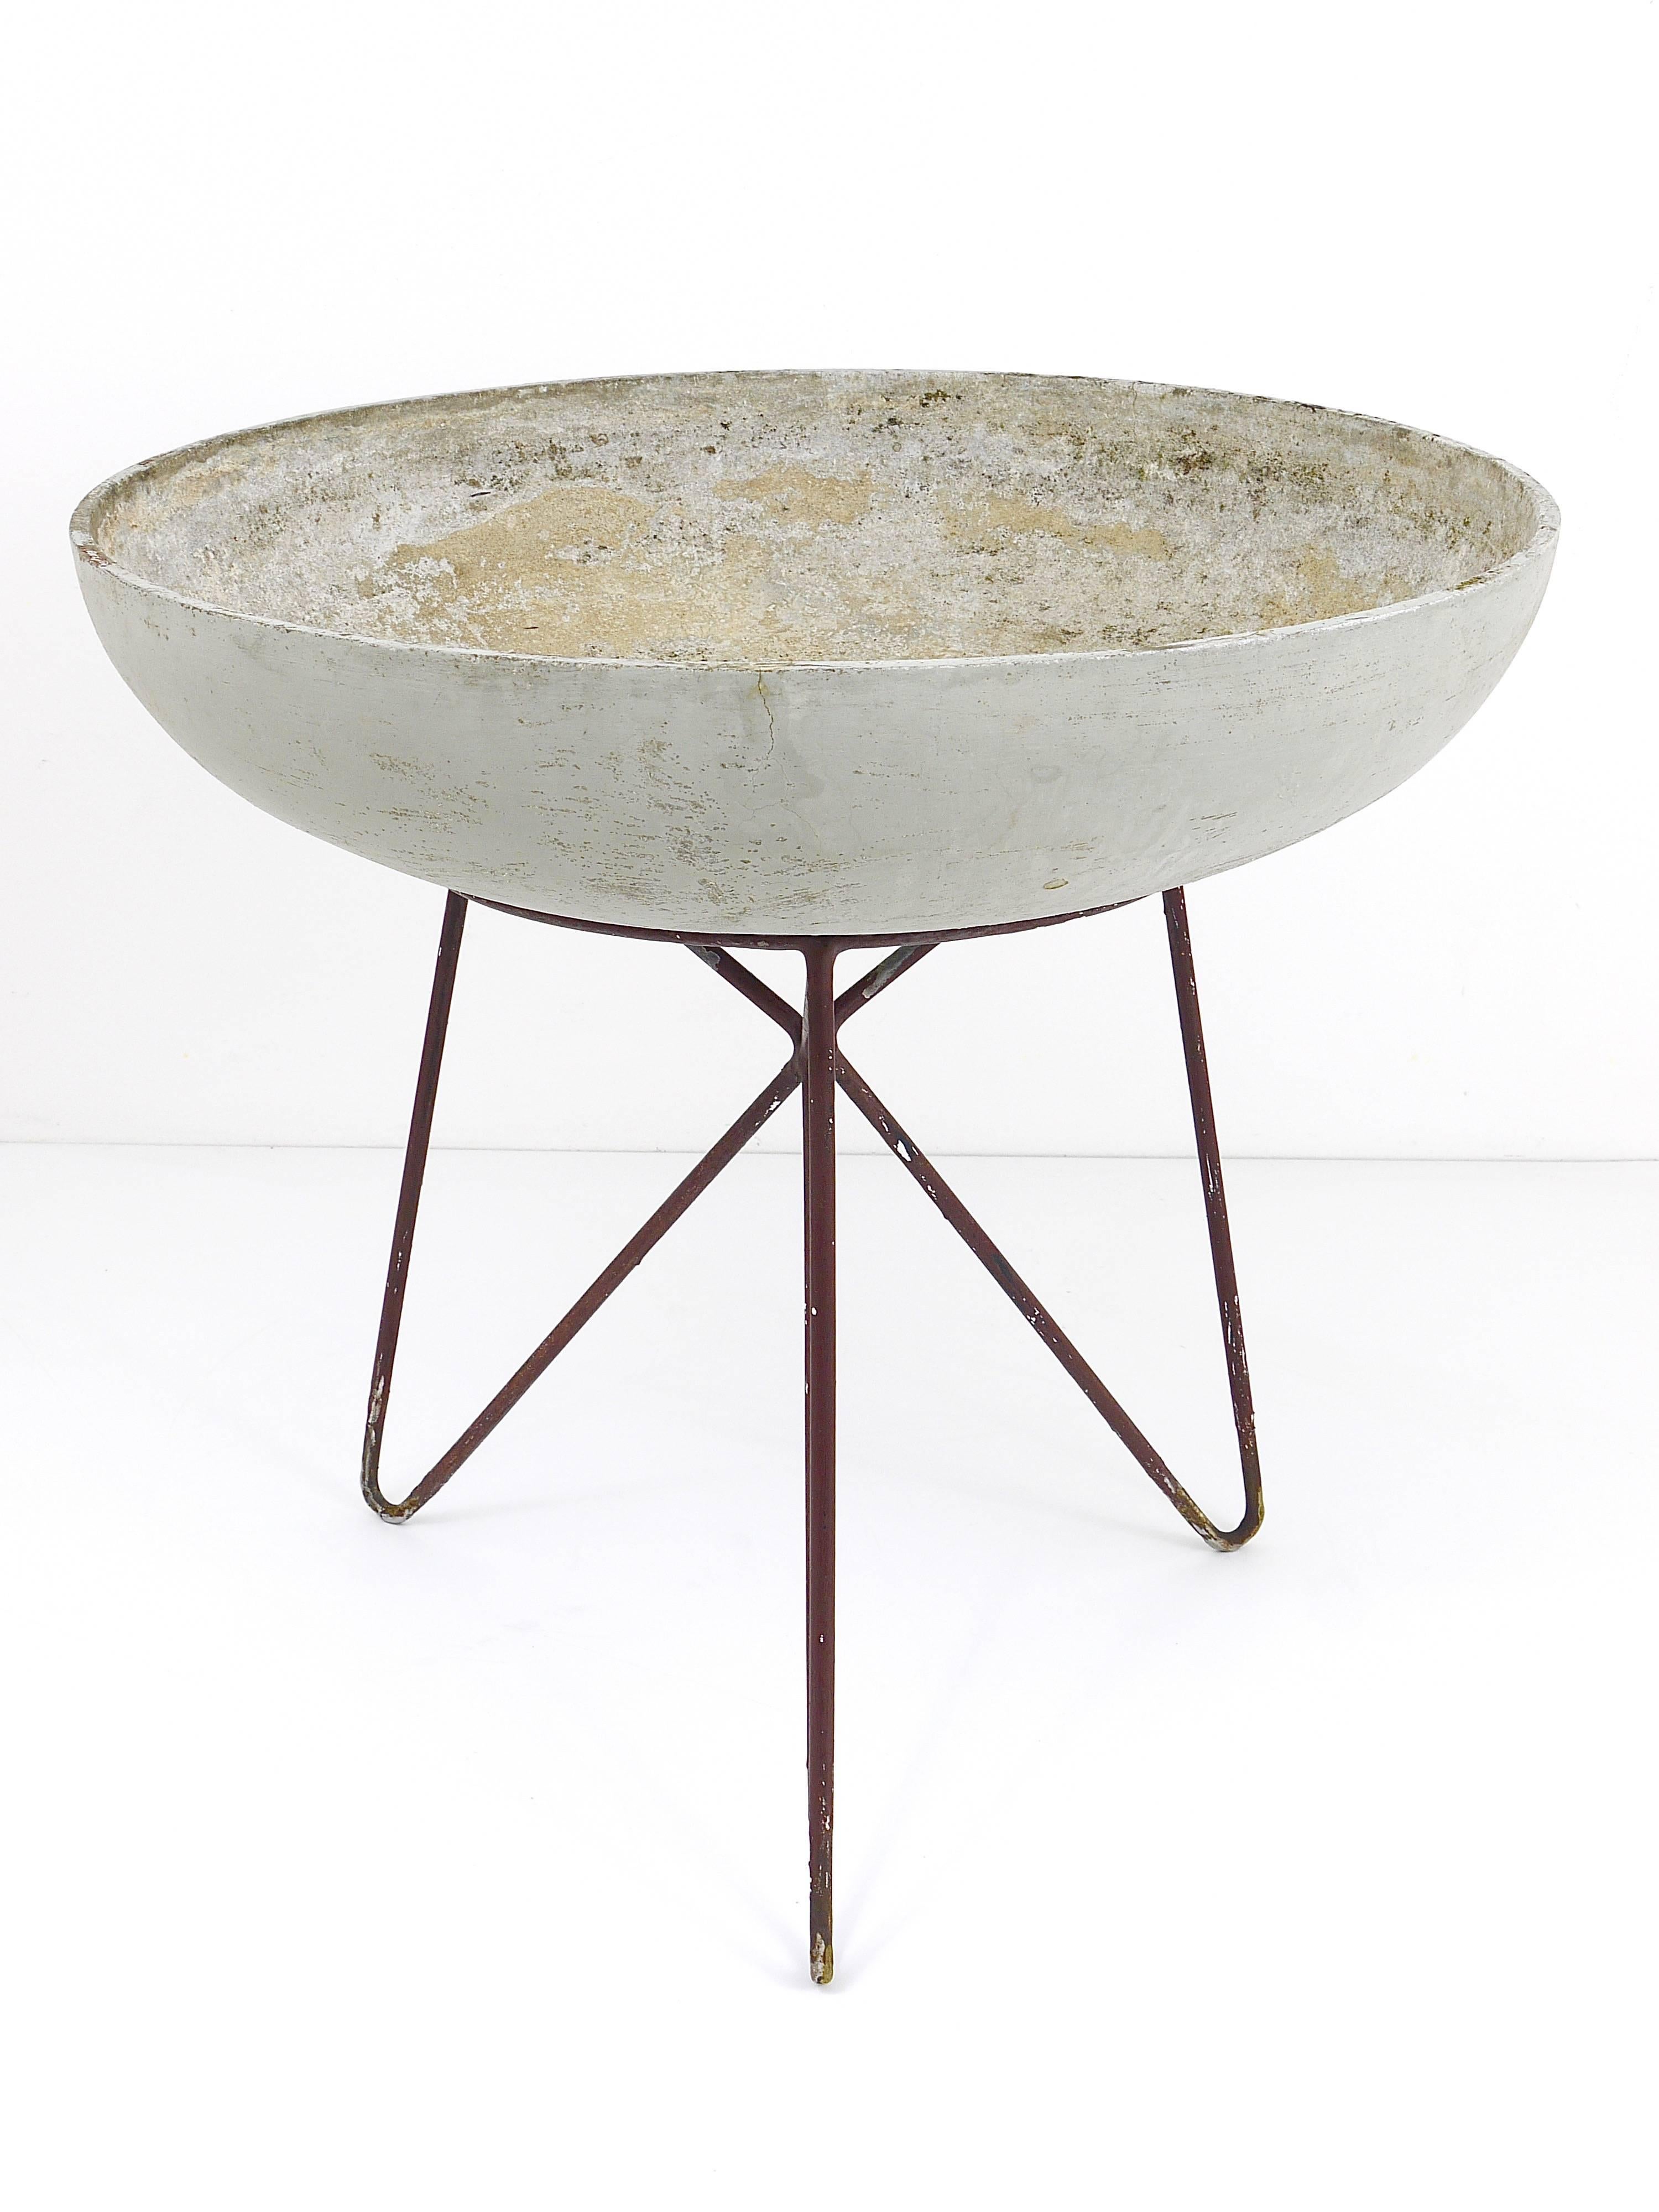 A beautiful fiber cement saucer planter with a nice metal loop tripod stand from the 1950s. Designed by Willy Guhl, executed by Eternit of Switzerland. In very good condition in original surface with natural weathered patina.